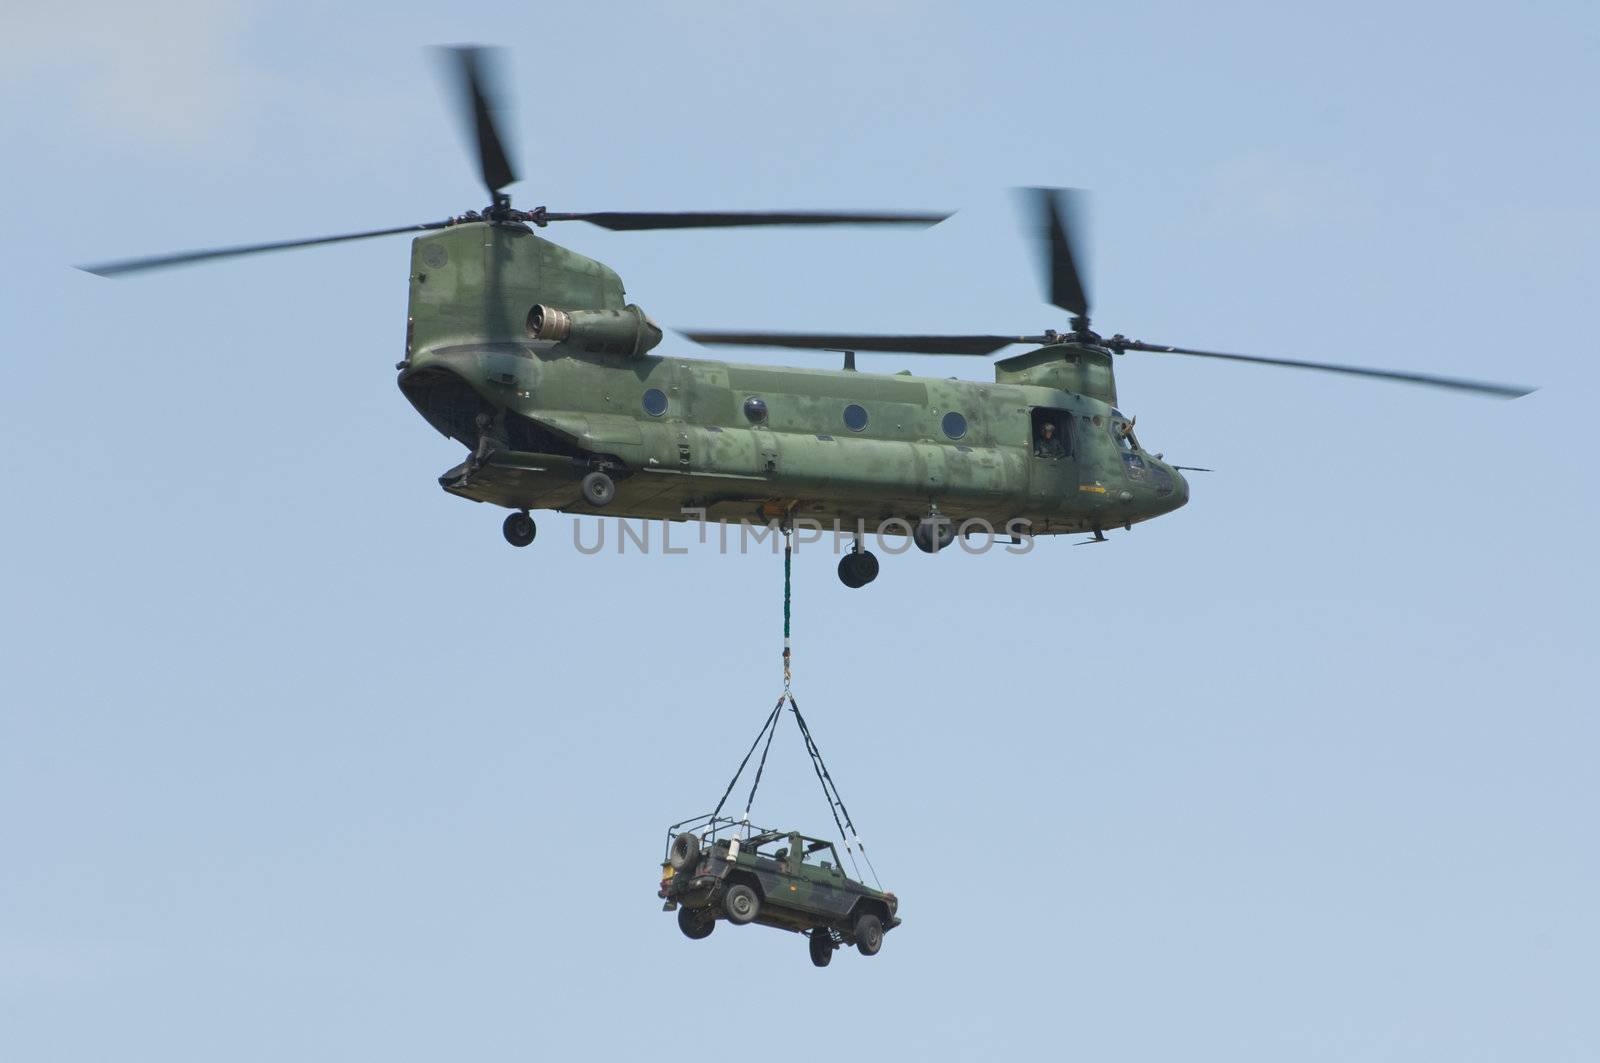 CH-47 Chinook helicopter carrying 4x4x off-road mercedes